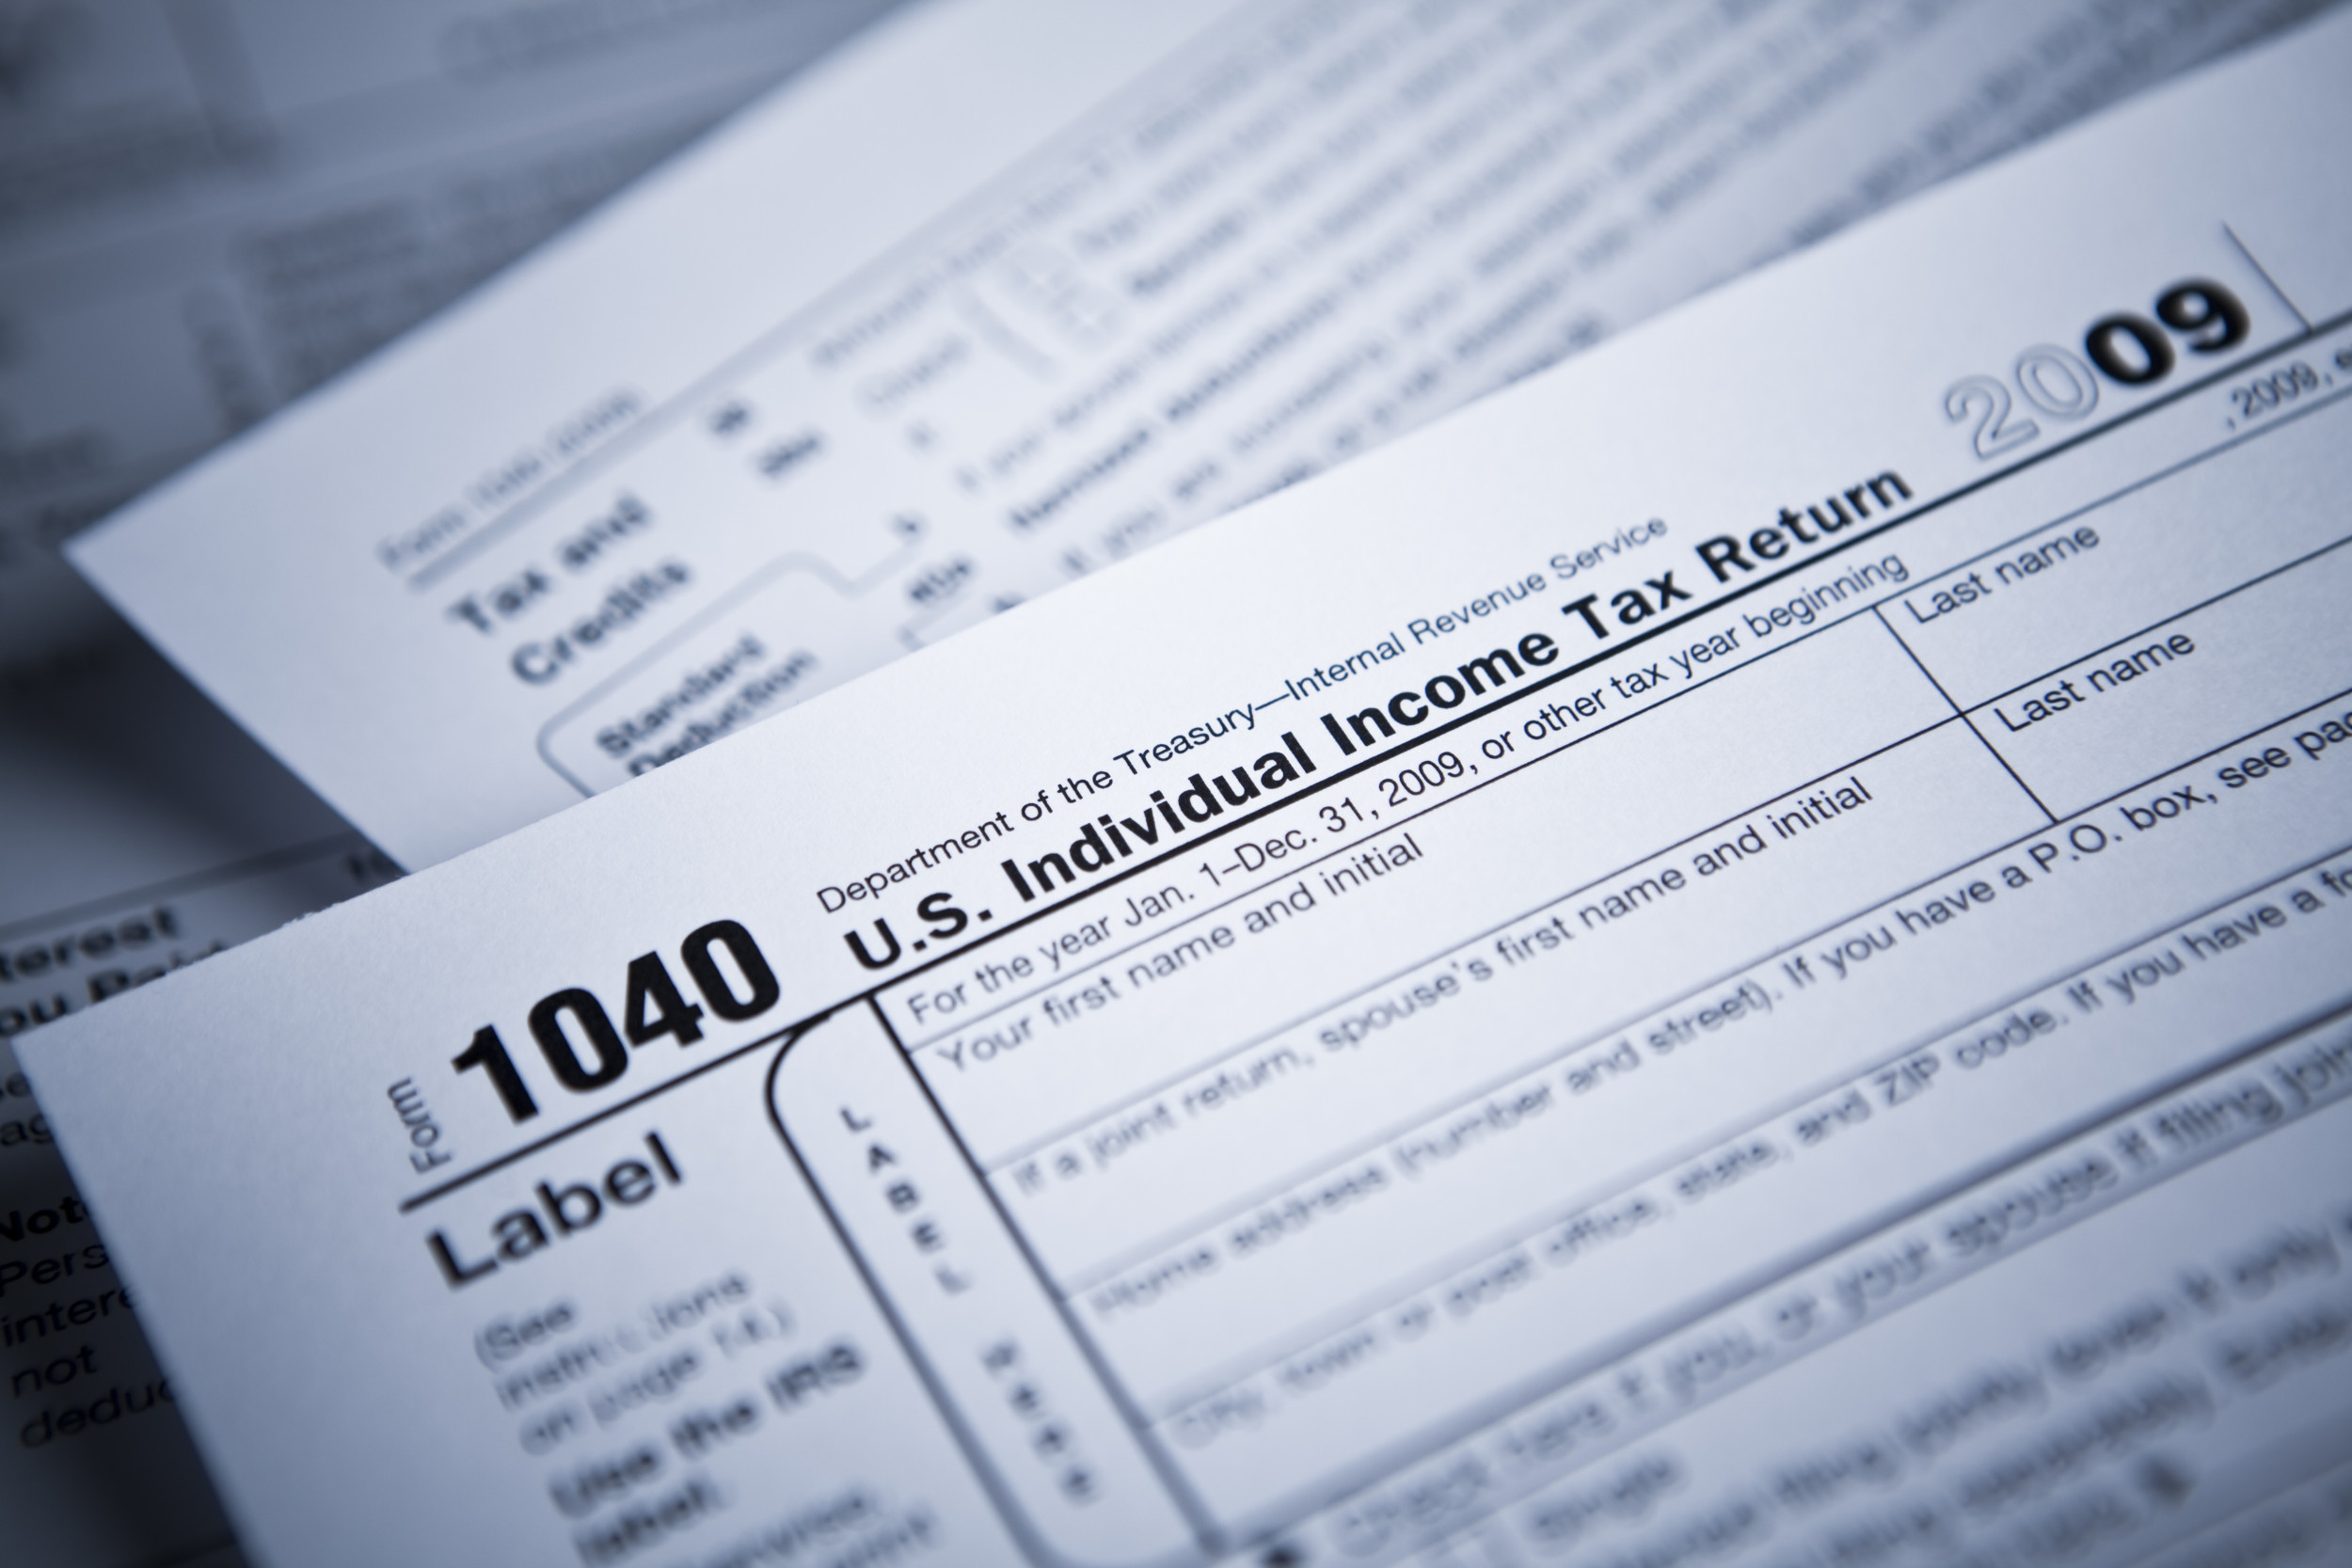 IRS Deadline How to File Your Taxes at the Last Minute or Get an Extension